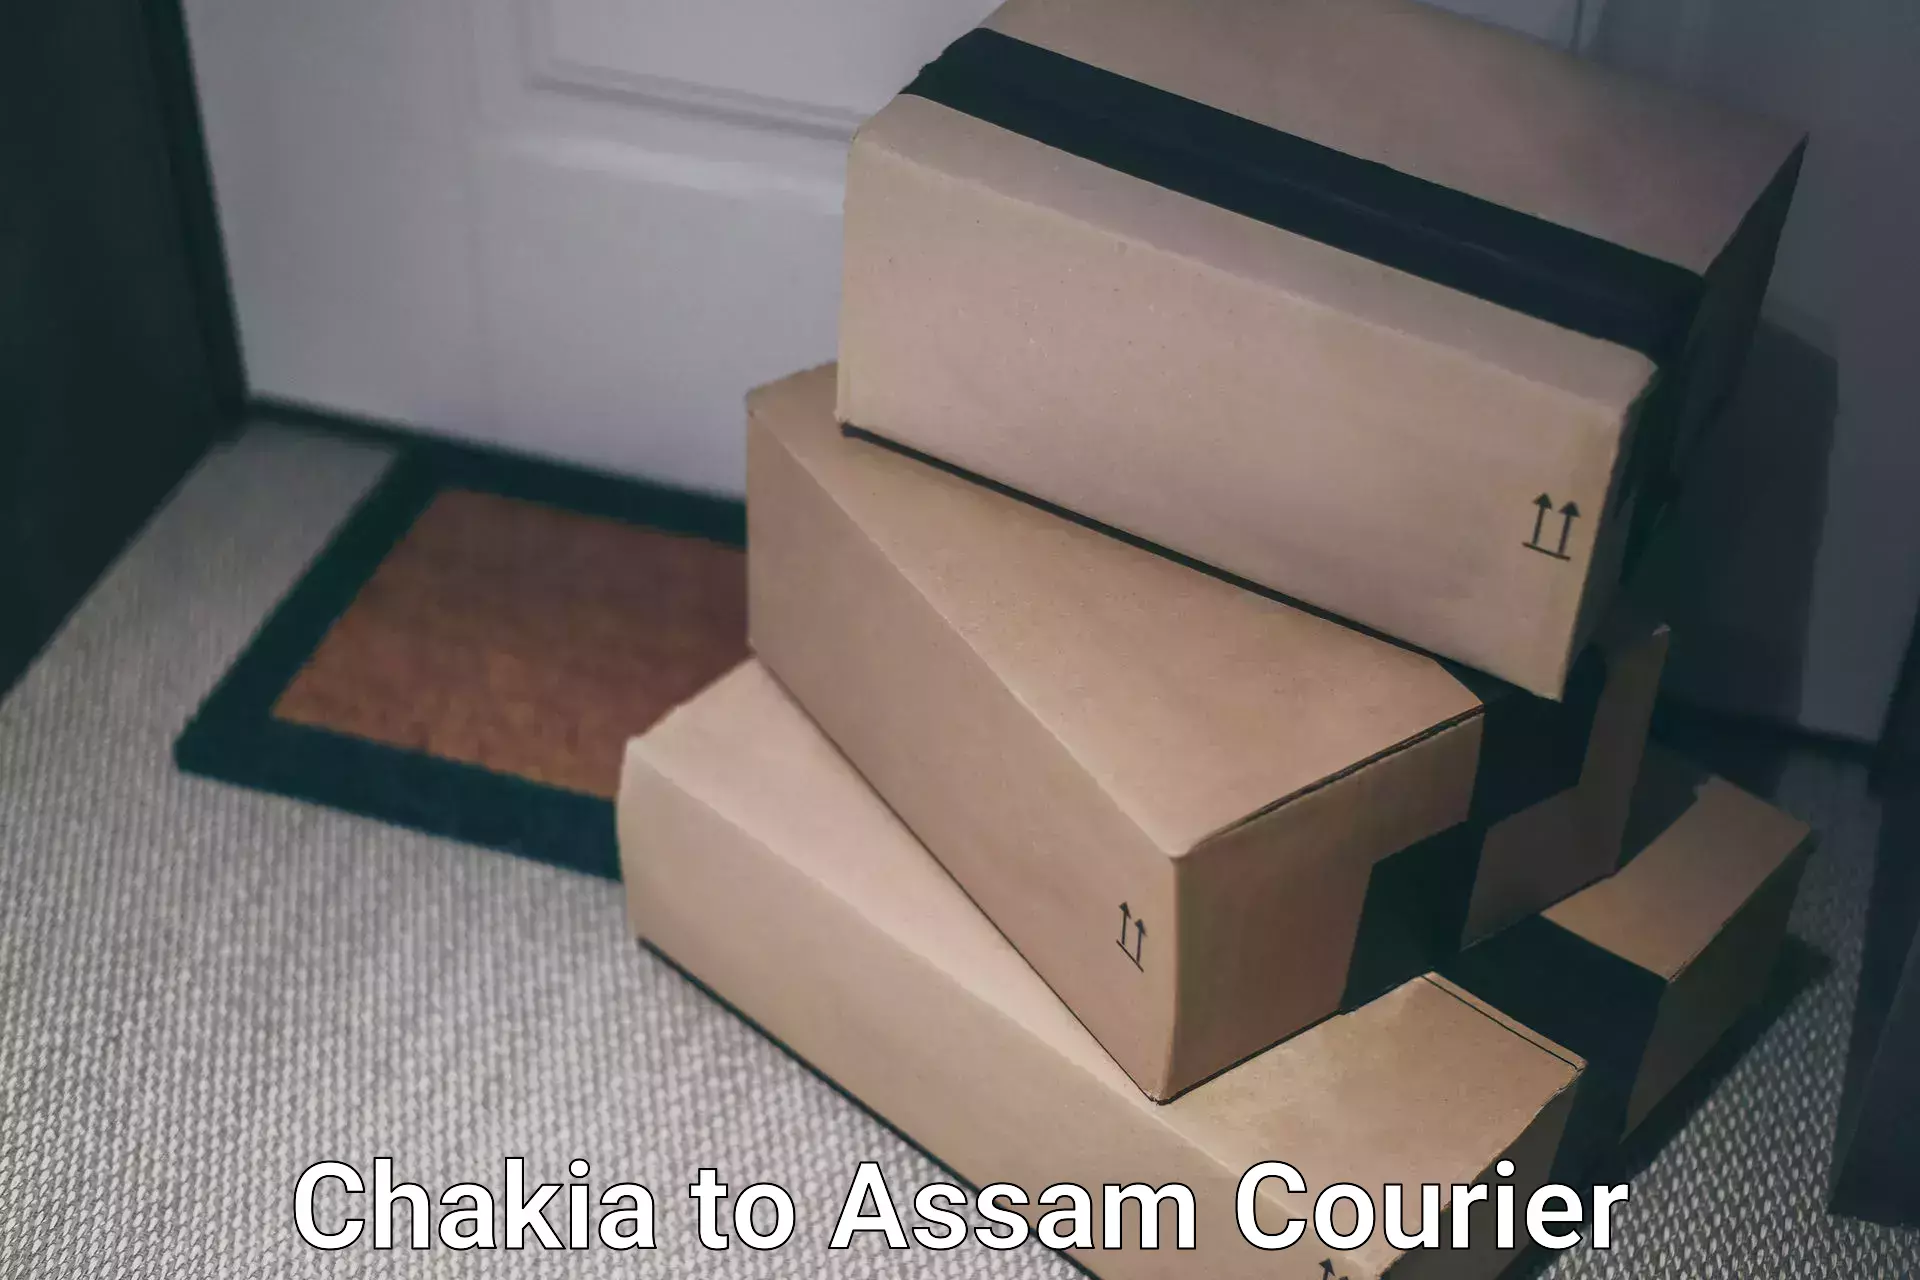 Cash on delivery service Chakia to Tezpur University